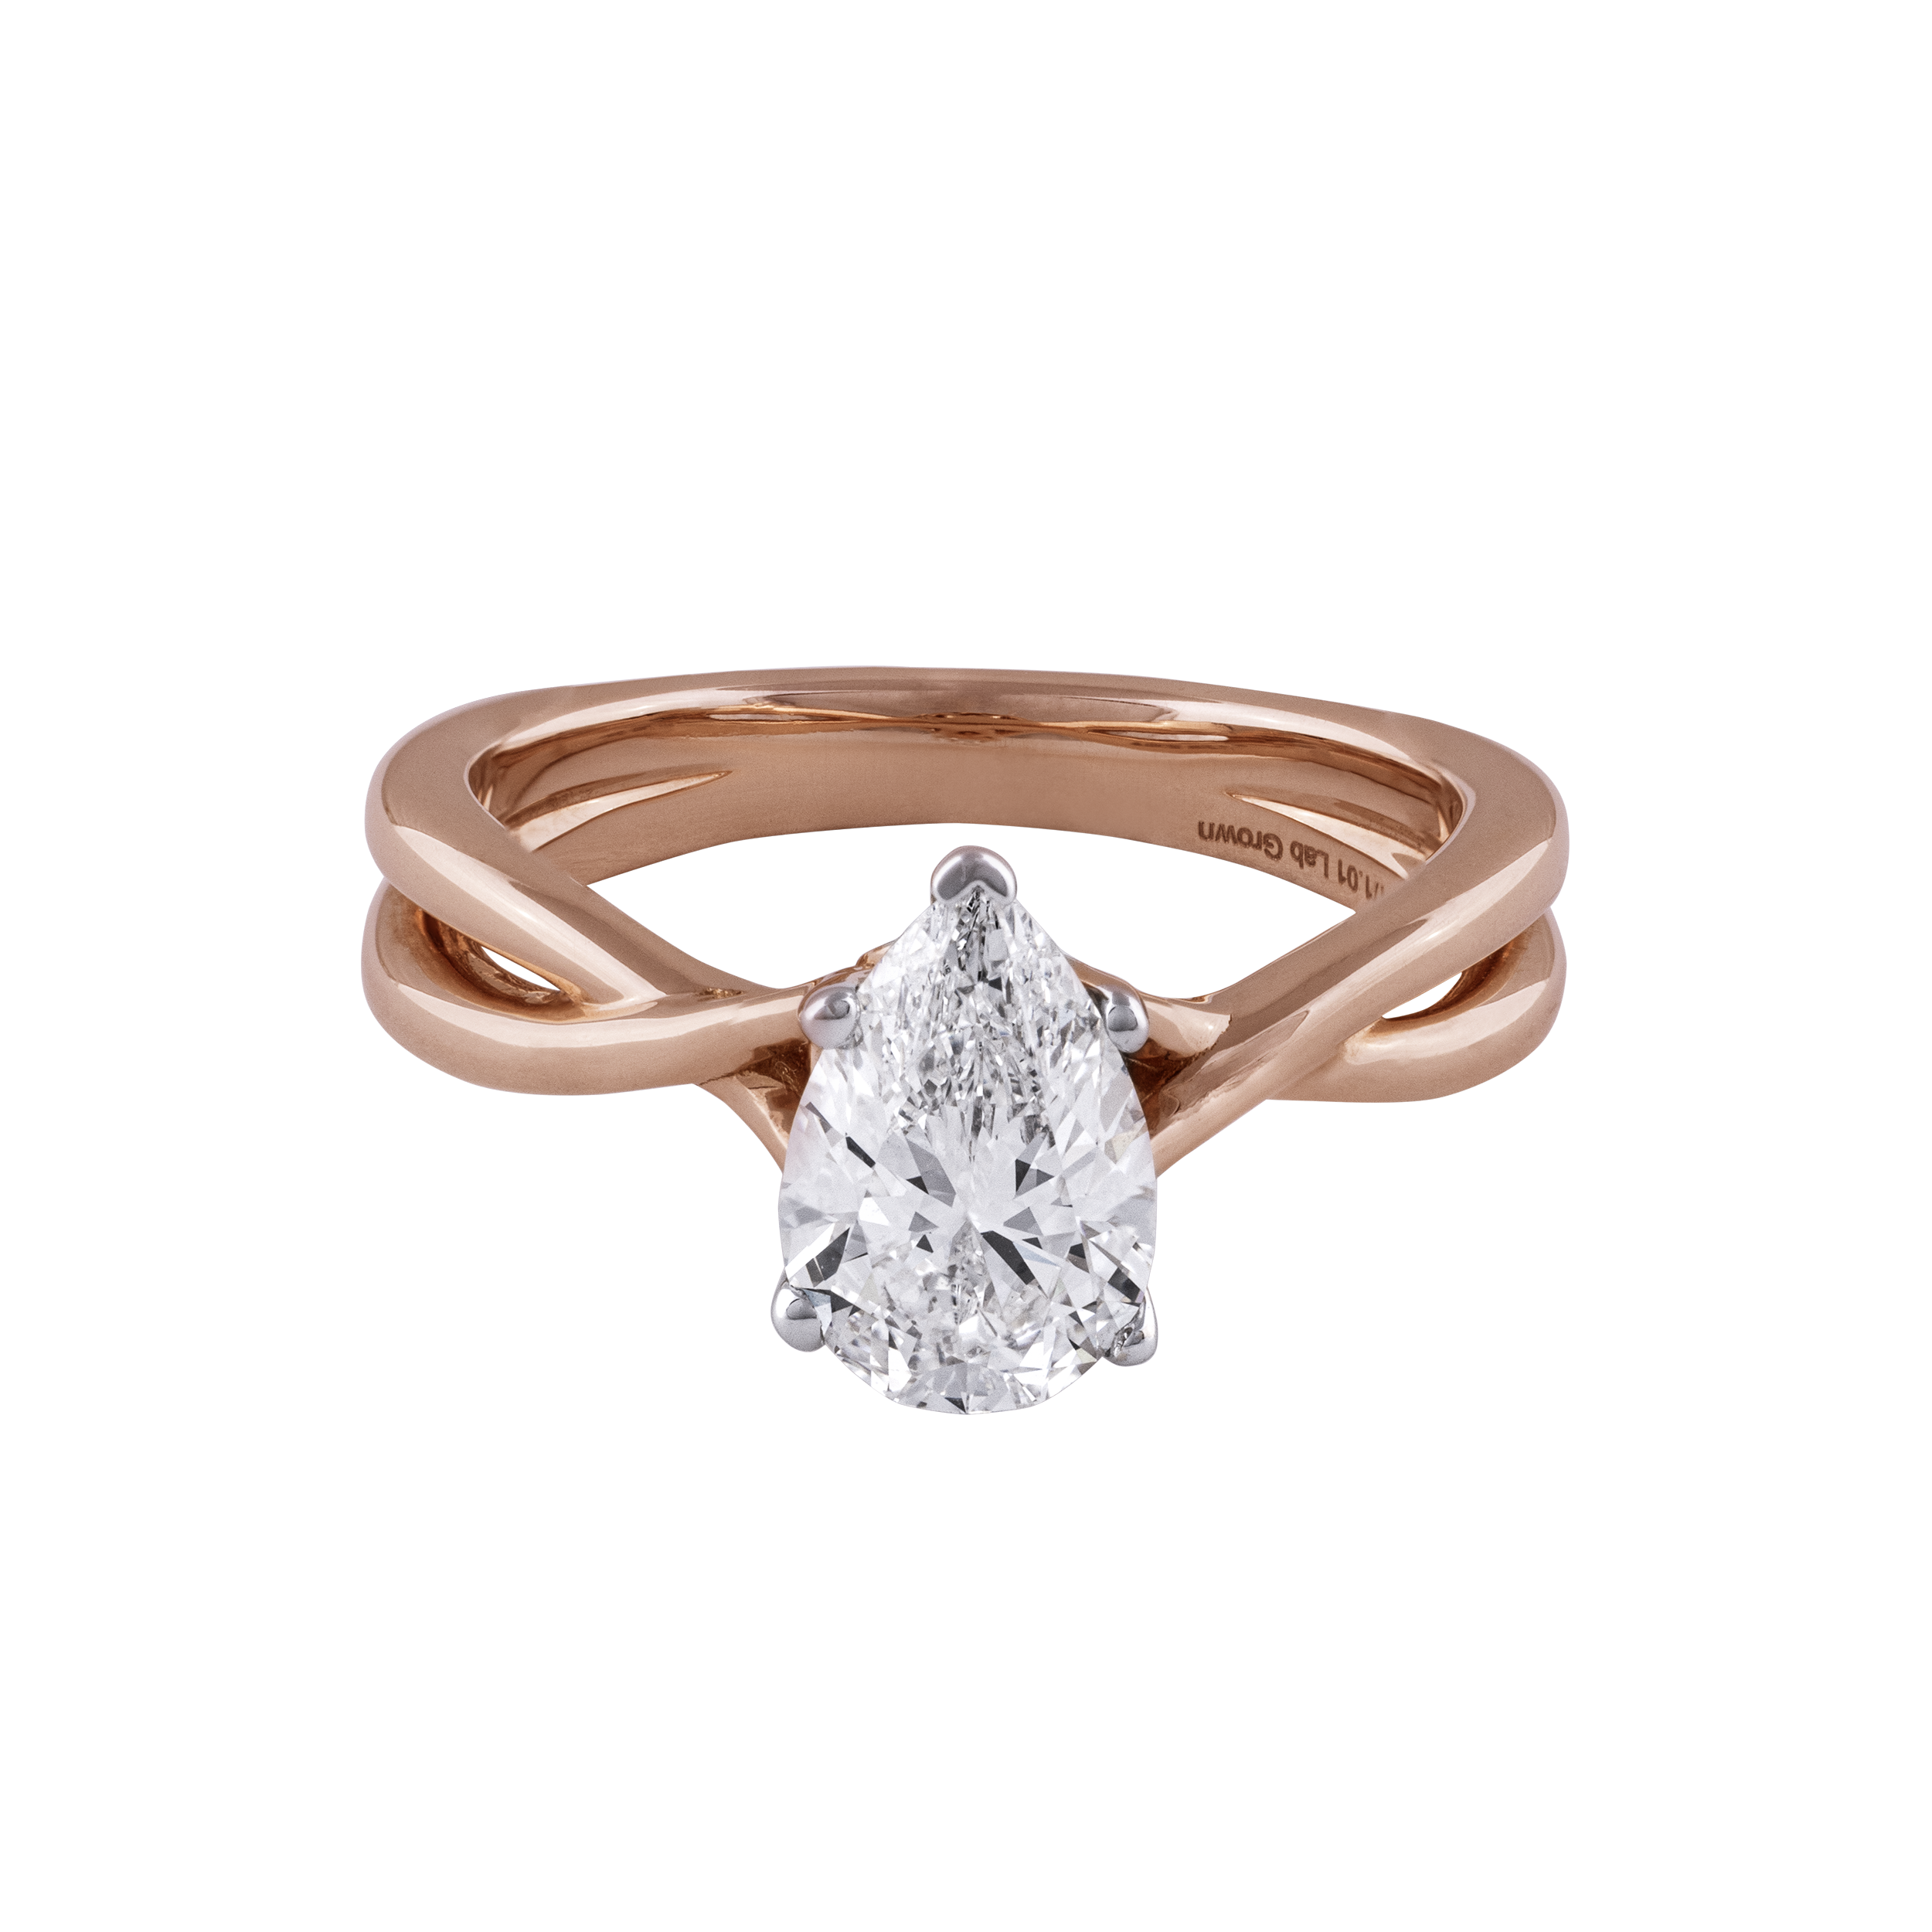 Rose Gold Solitaire Diamond Ring | SKU: 0019053028